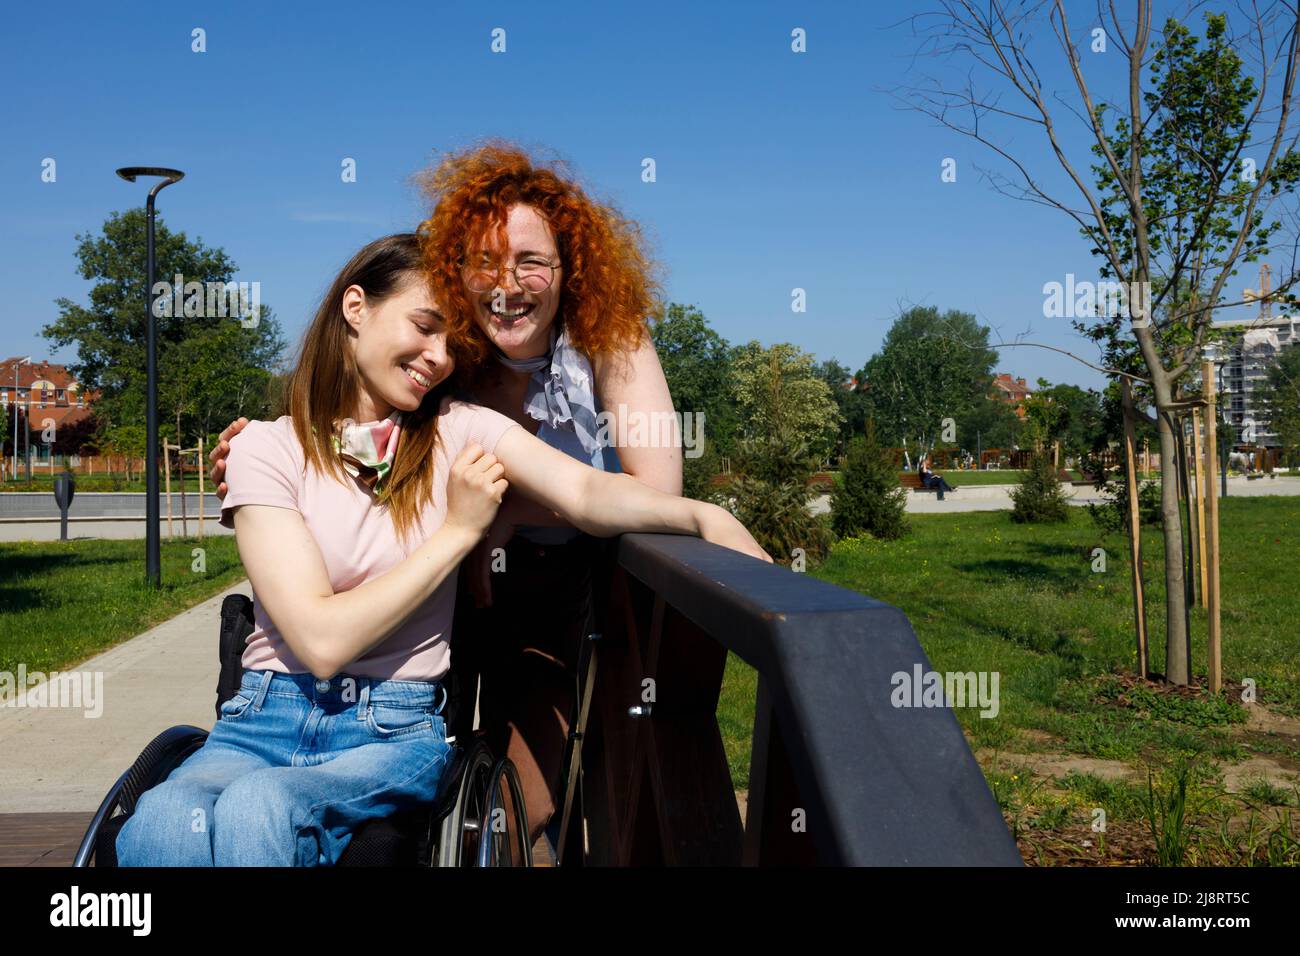 Paraplegic woman and her friend laughing and embracing each other on a sunny summer day Stock Photo